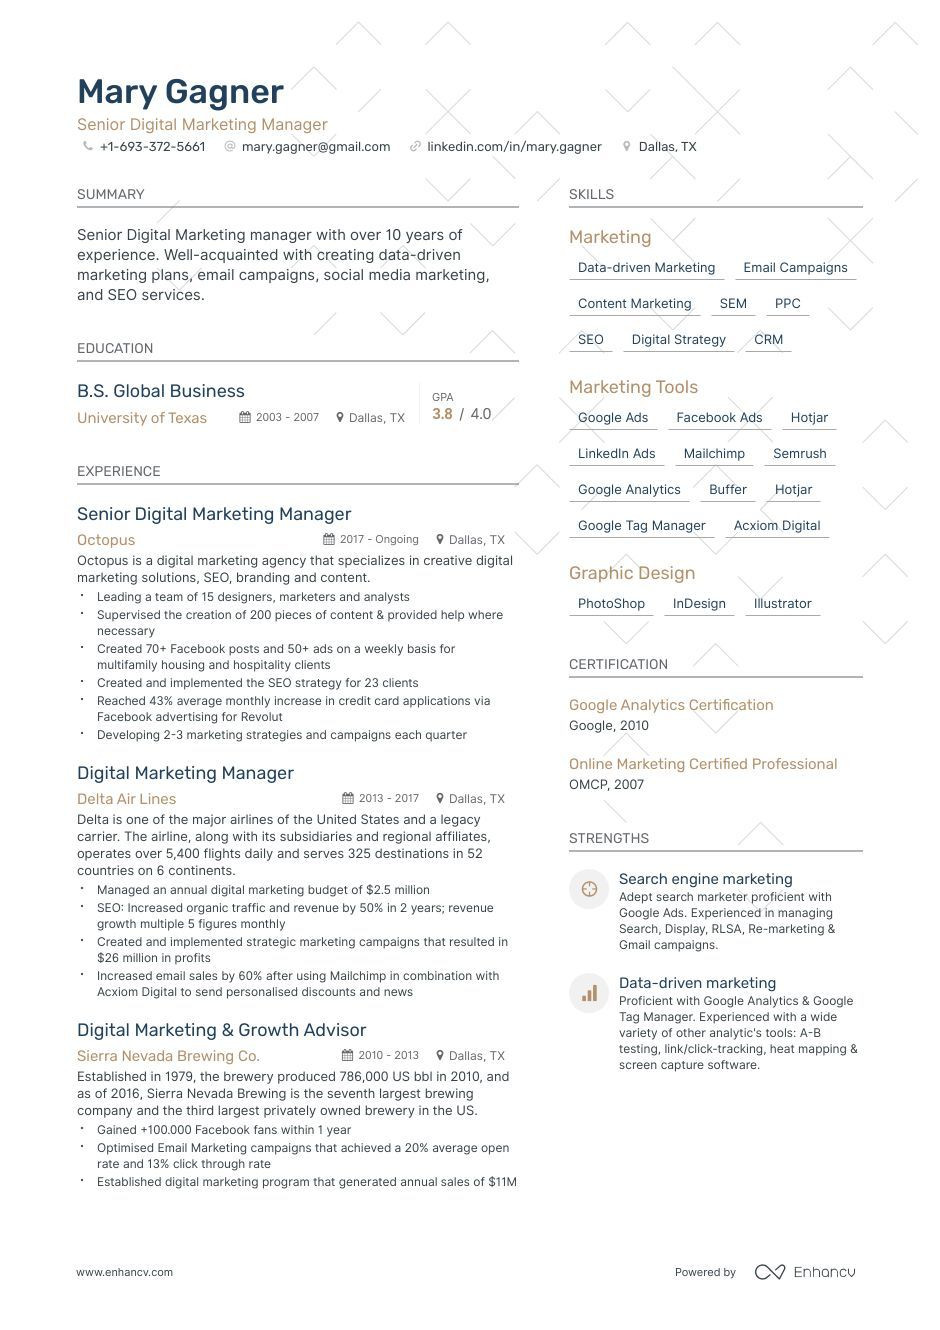 Samples Of Entry Level Marketing Resumes Digital Marketing Resume Examples & Guide for 2022 (layout, Skills …